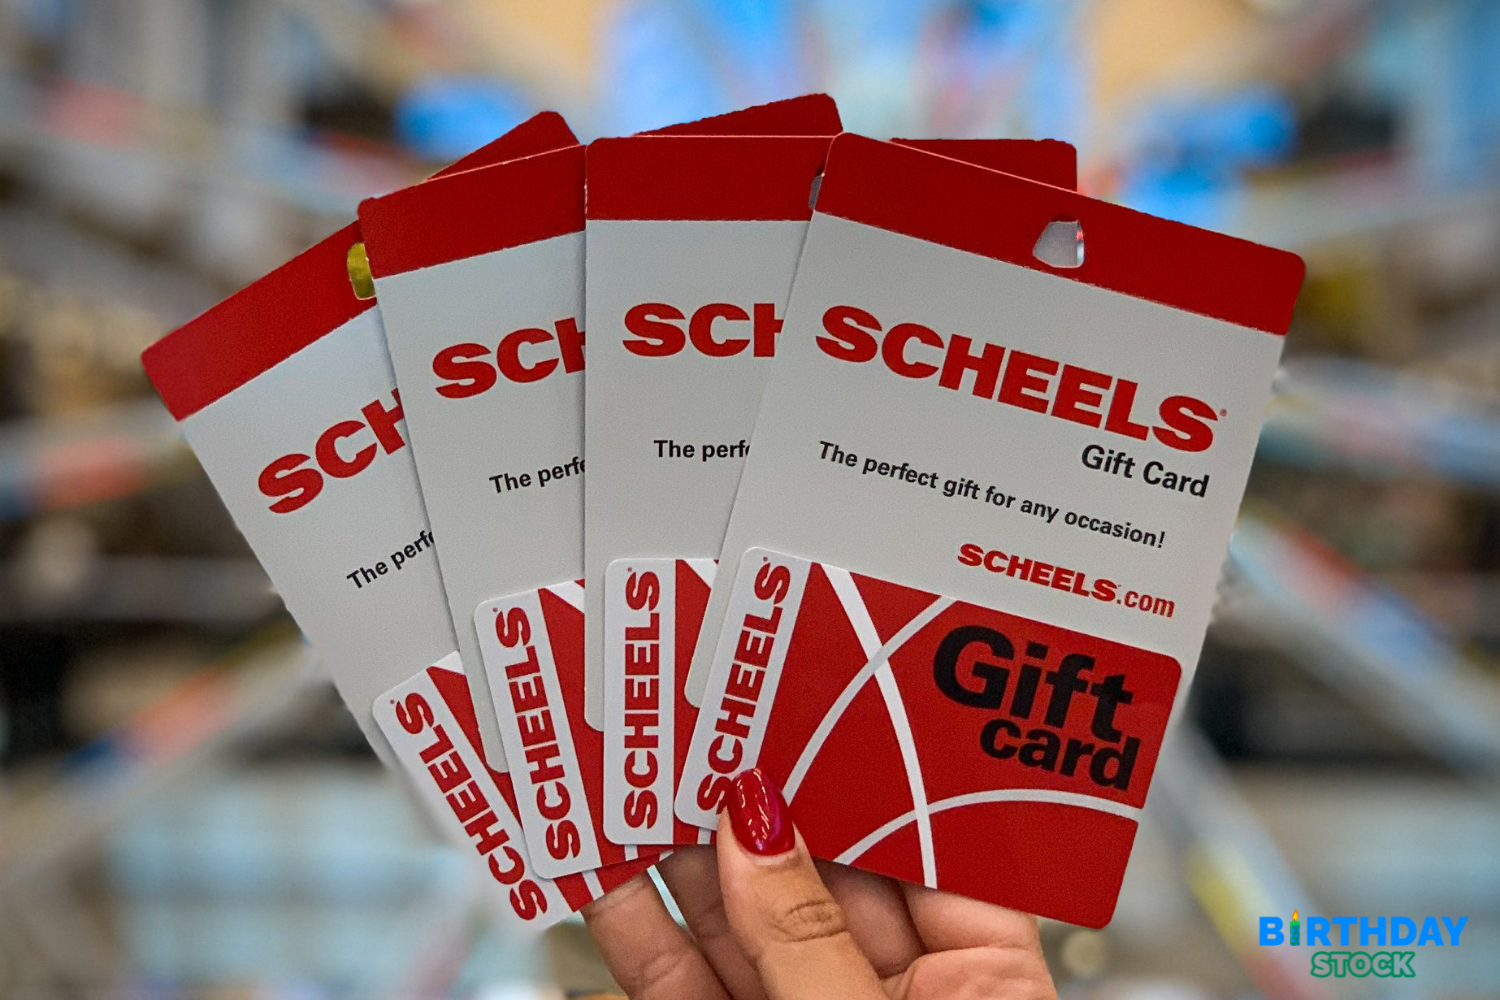 SCHEELS Gift Cards - Check Balance Online, Discount, Target, Printable, Uses